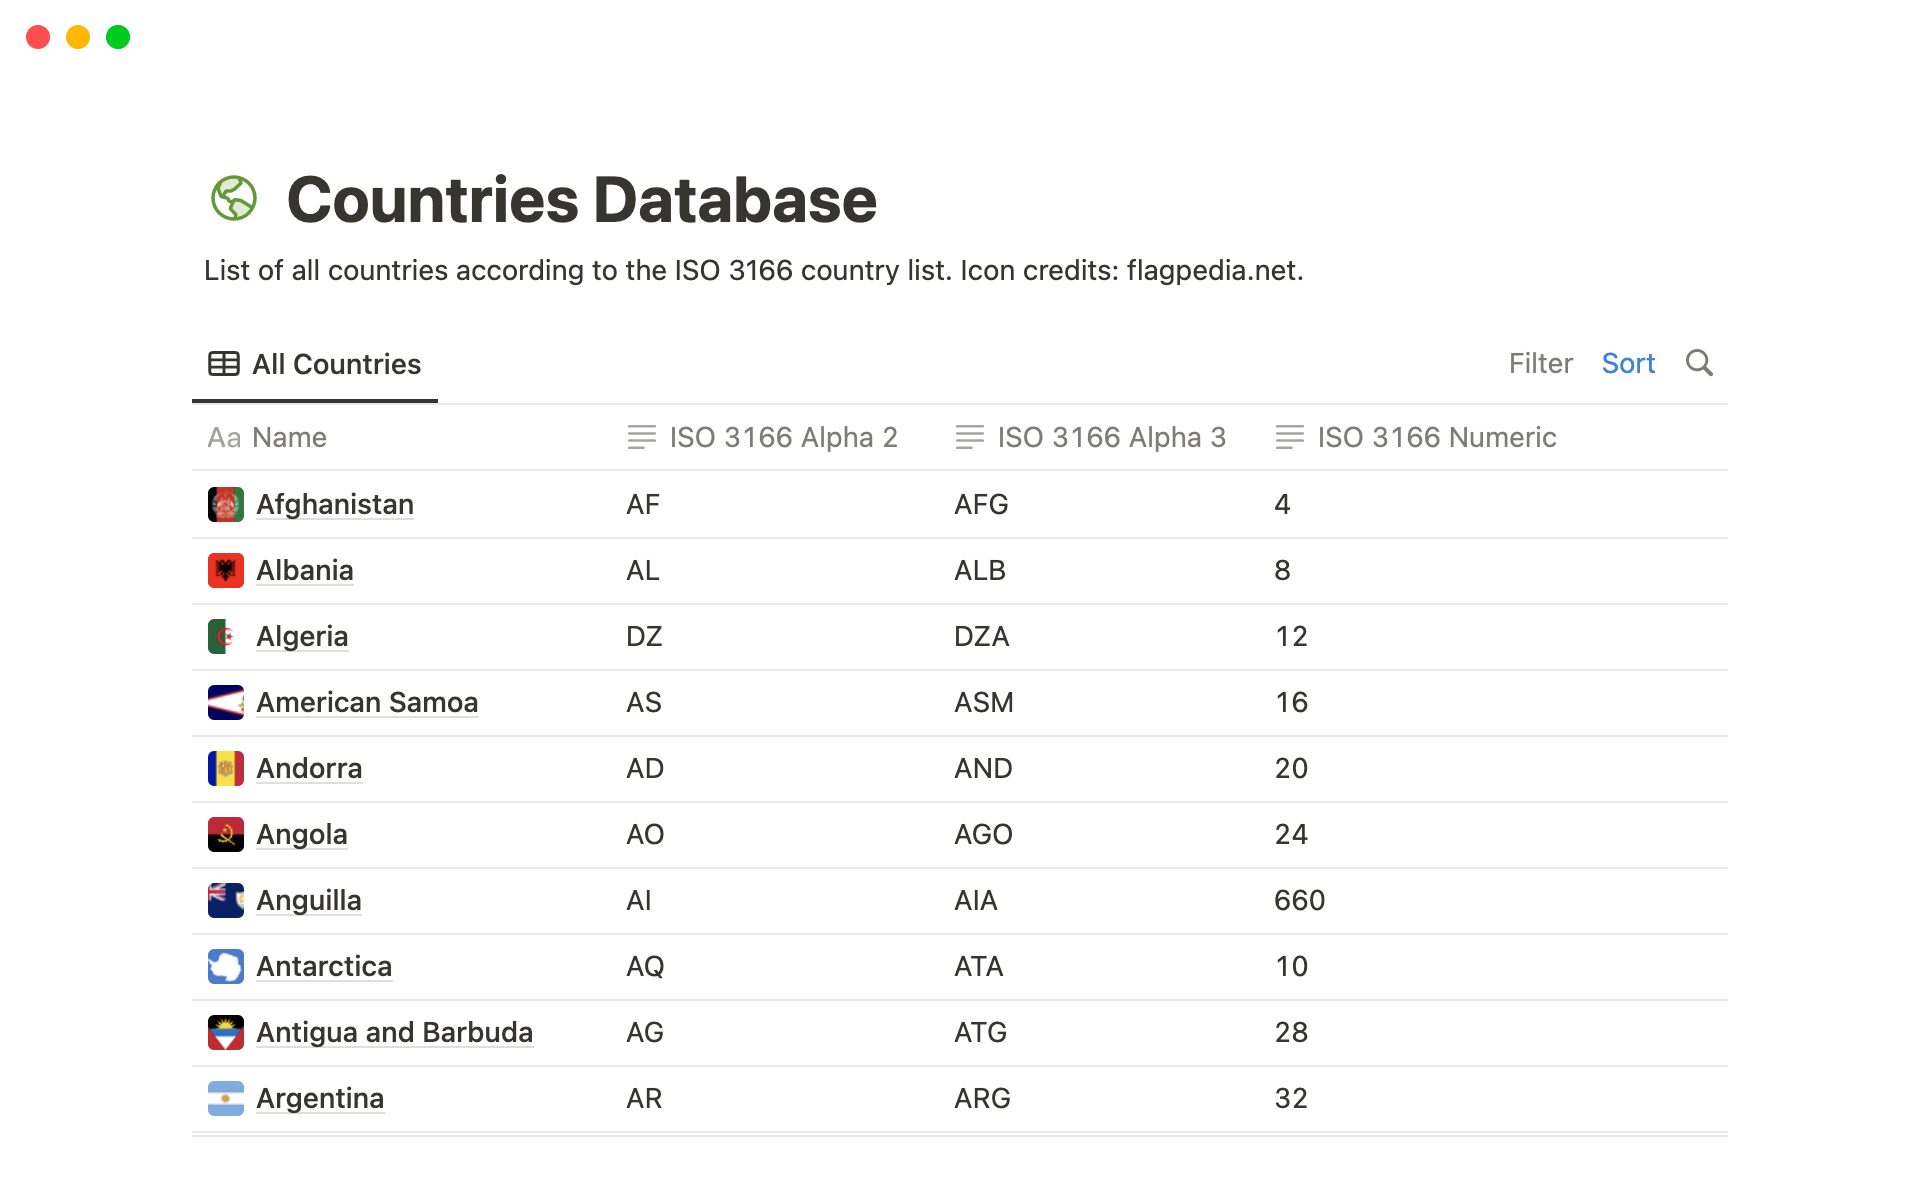 A database with all countries, as defined in the ISO 3166 country list.